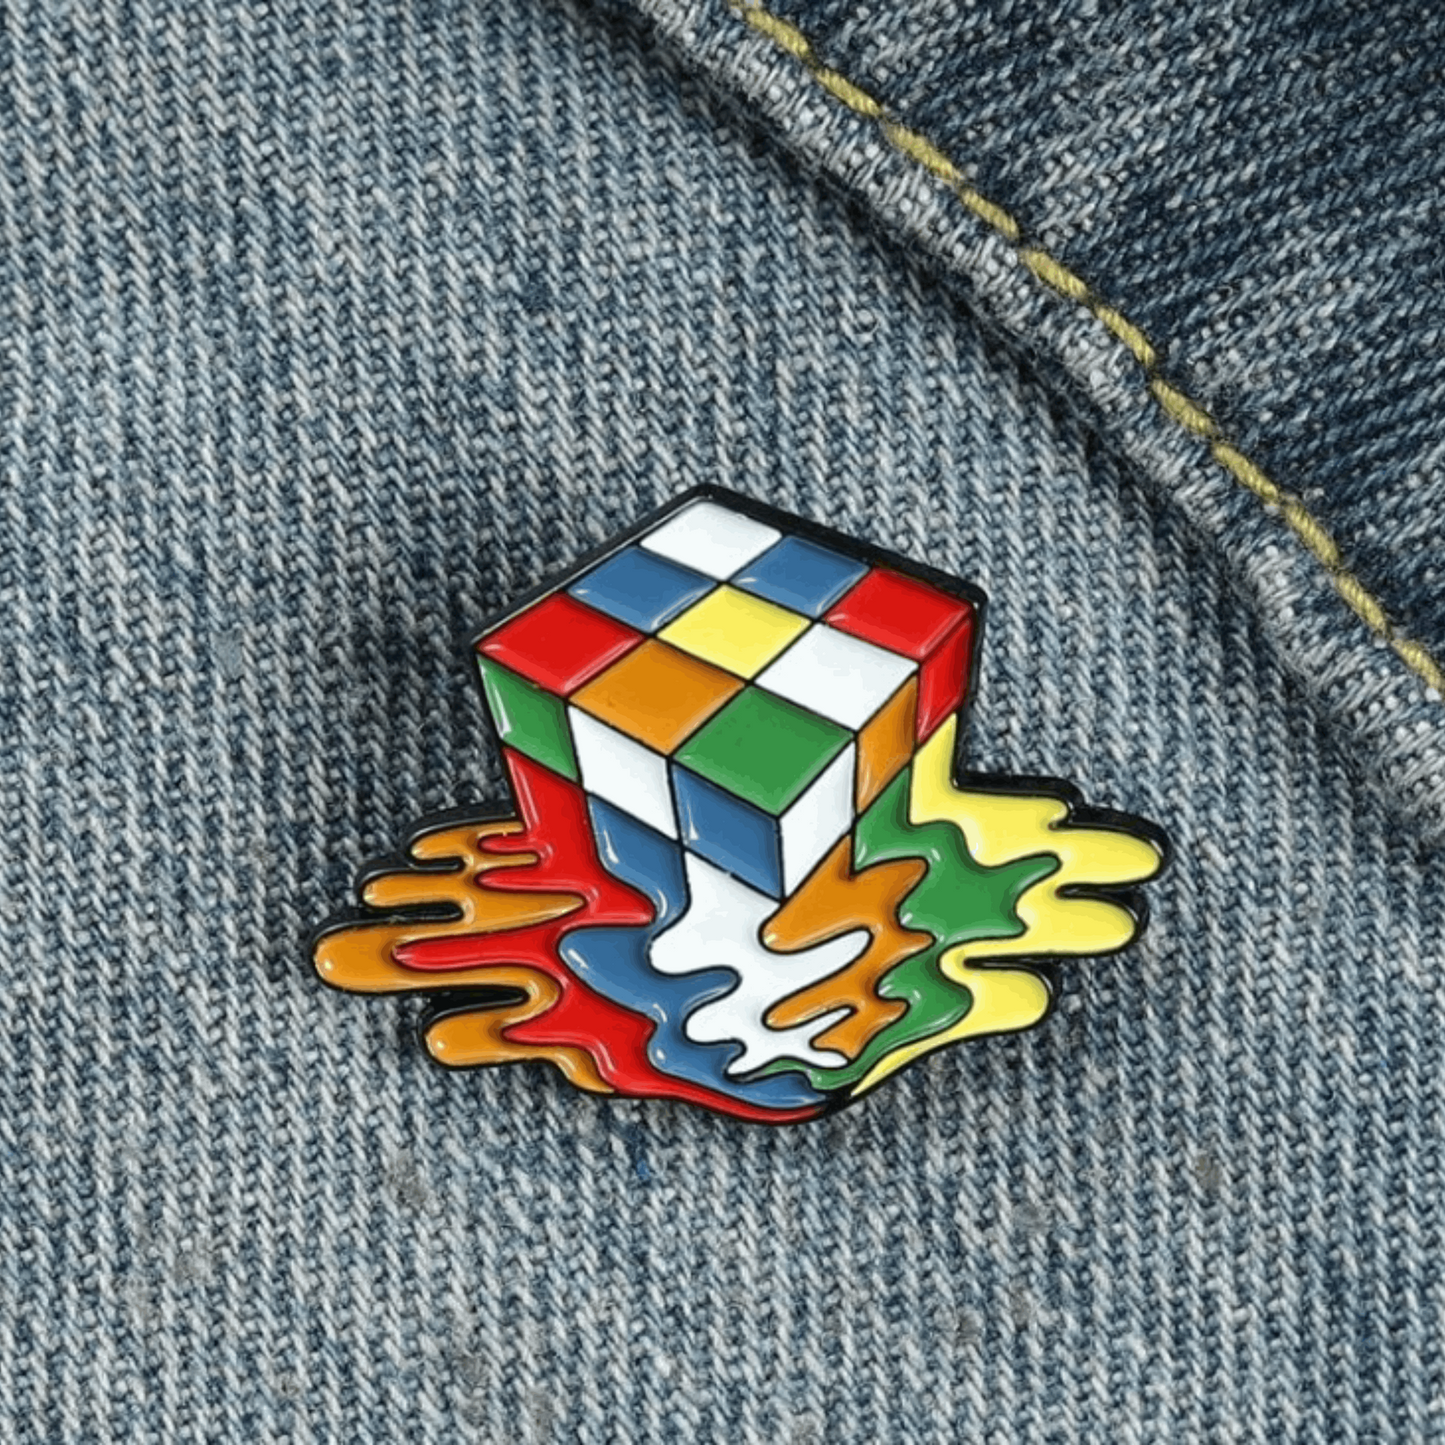 80's Rubix Cube Melted Design Metal Acrylic Fashion Brooch Pin